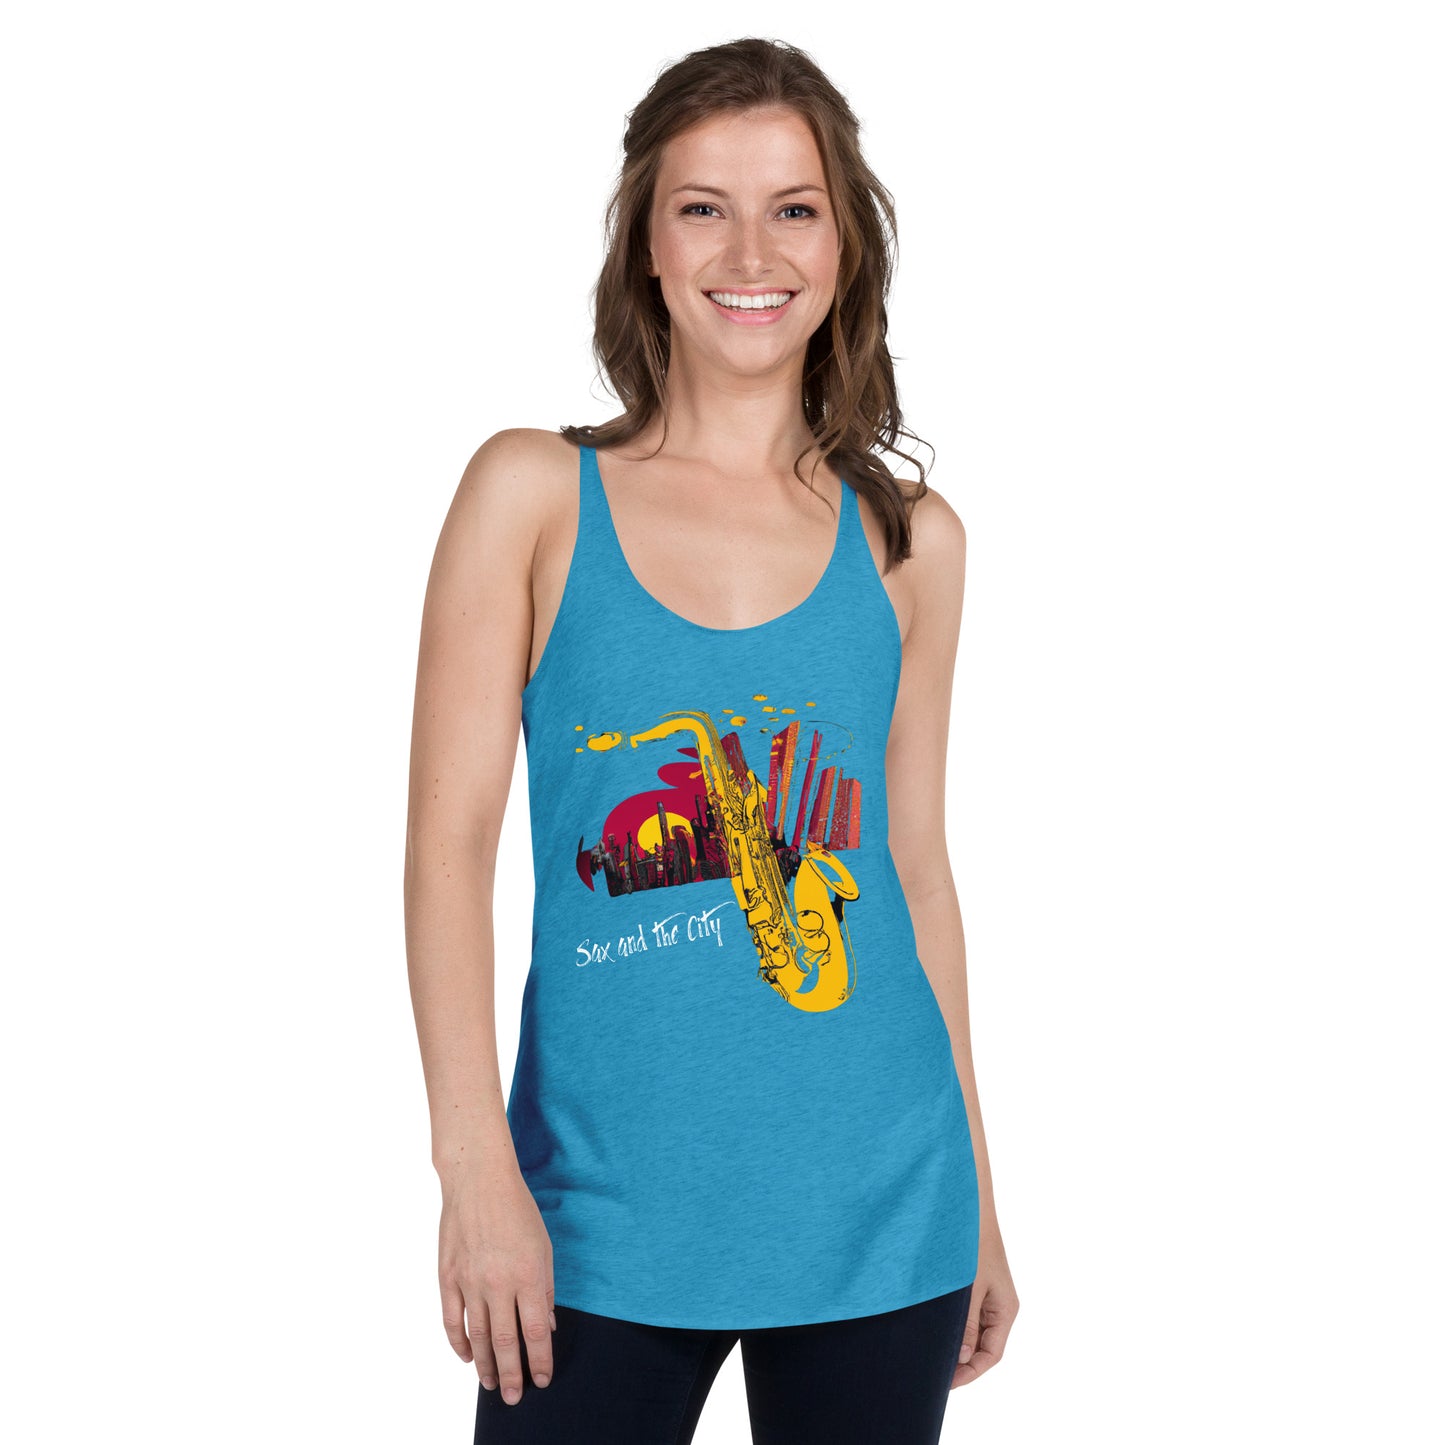 Sax and The City Women's Racerback Tank